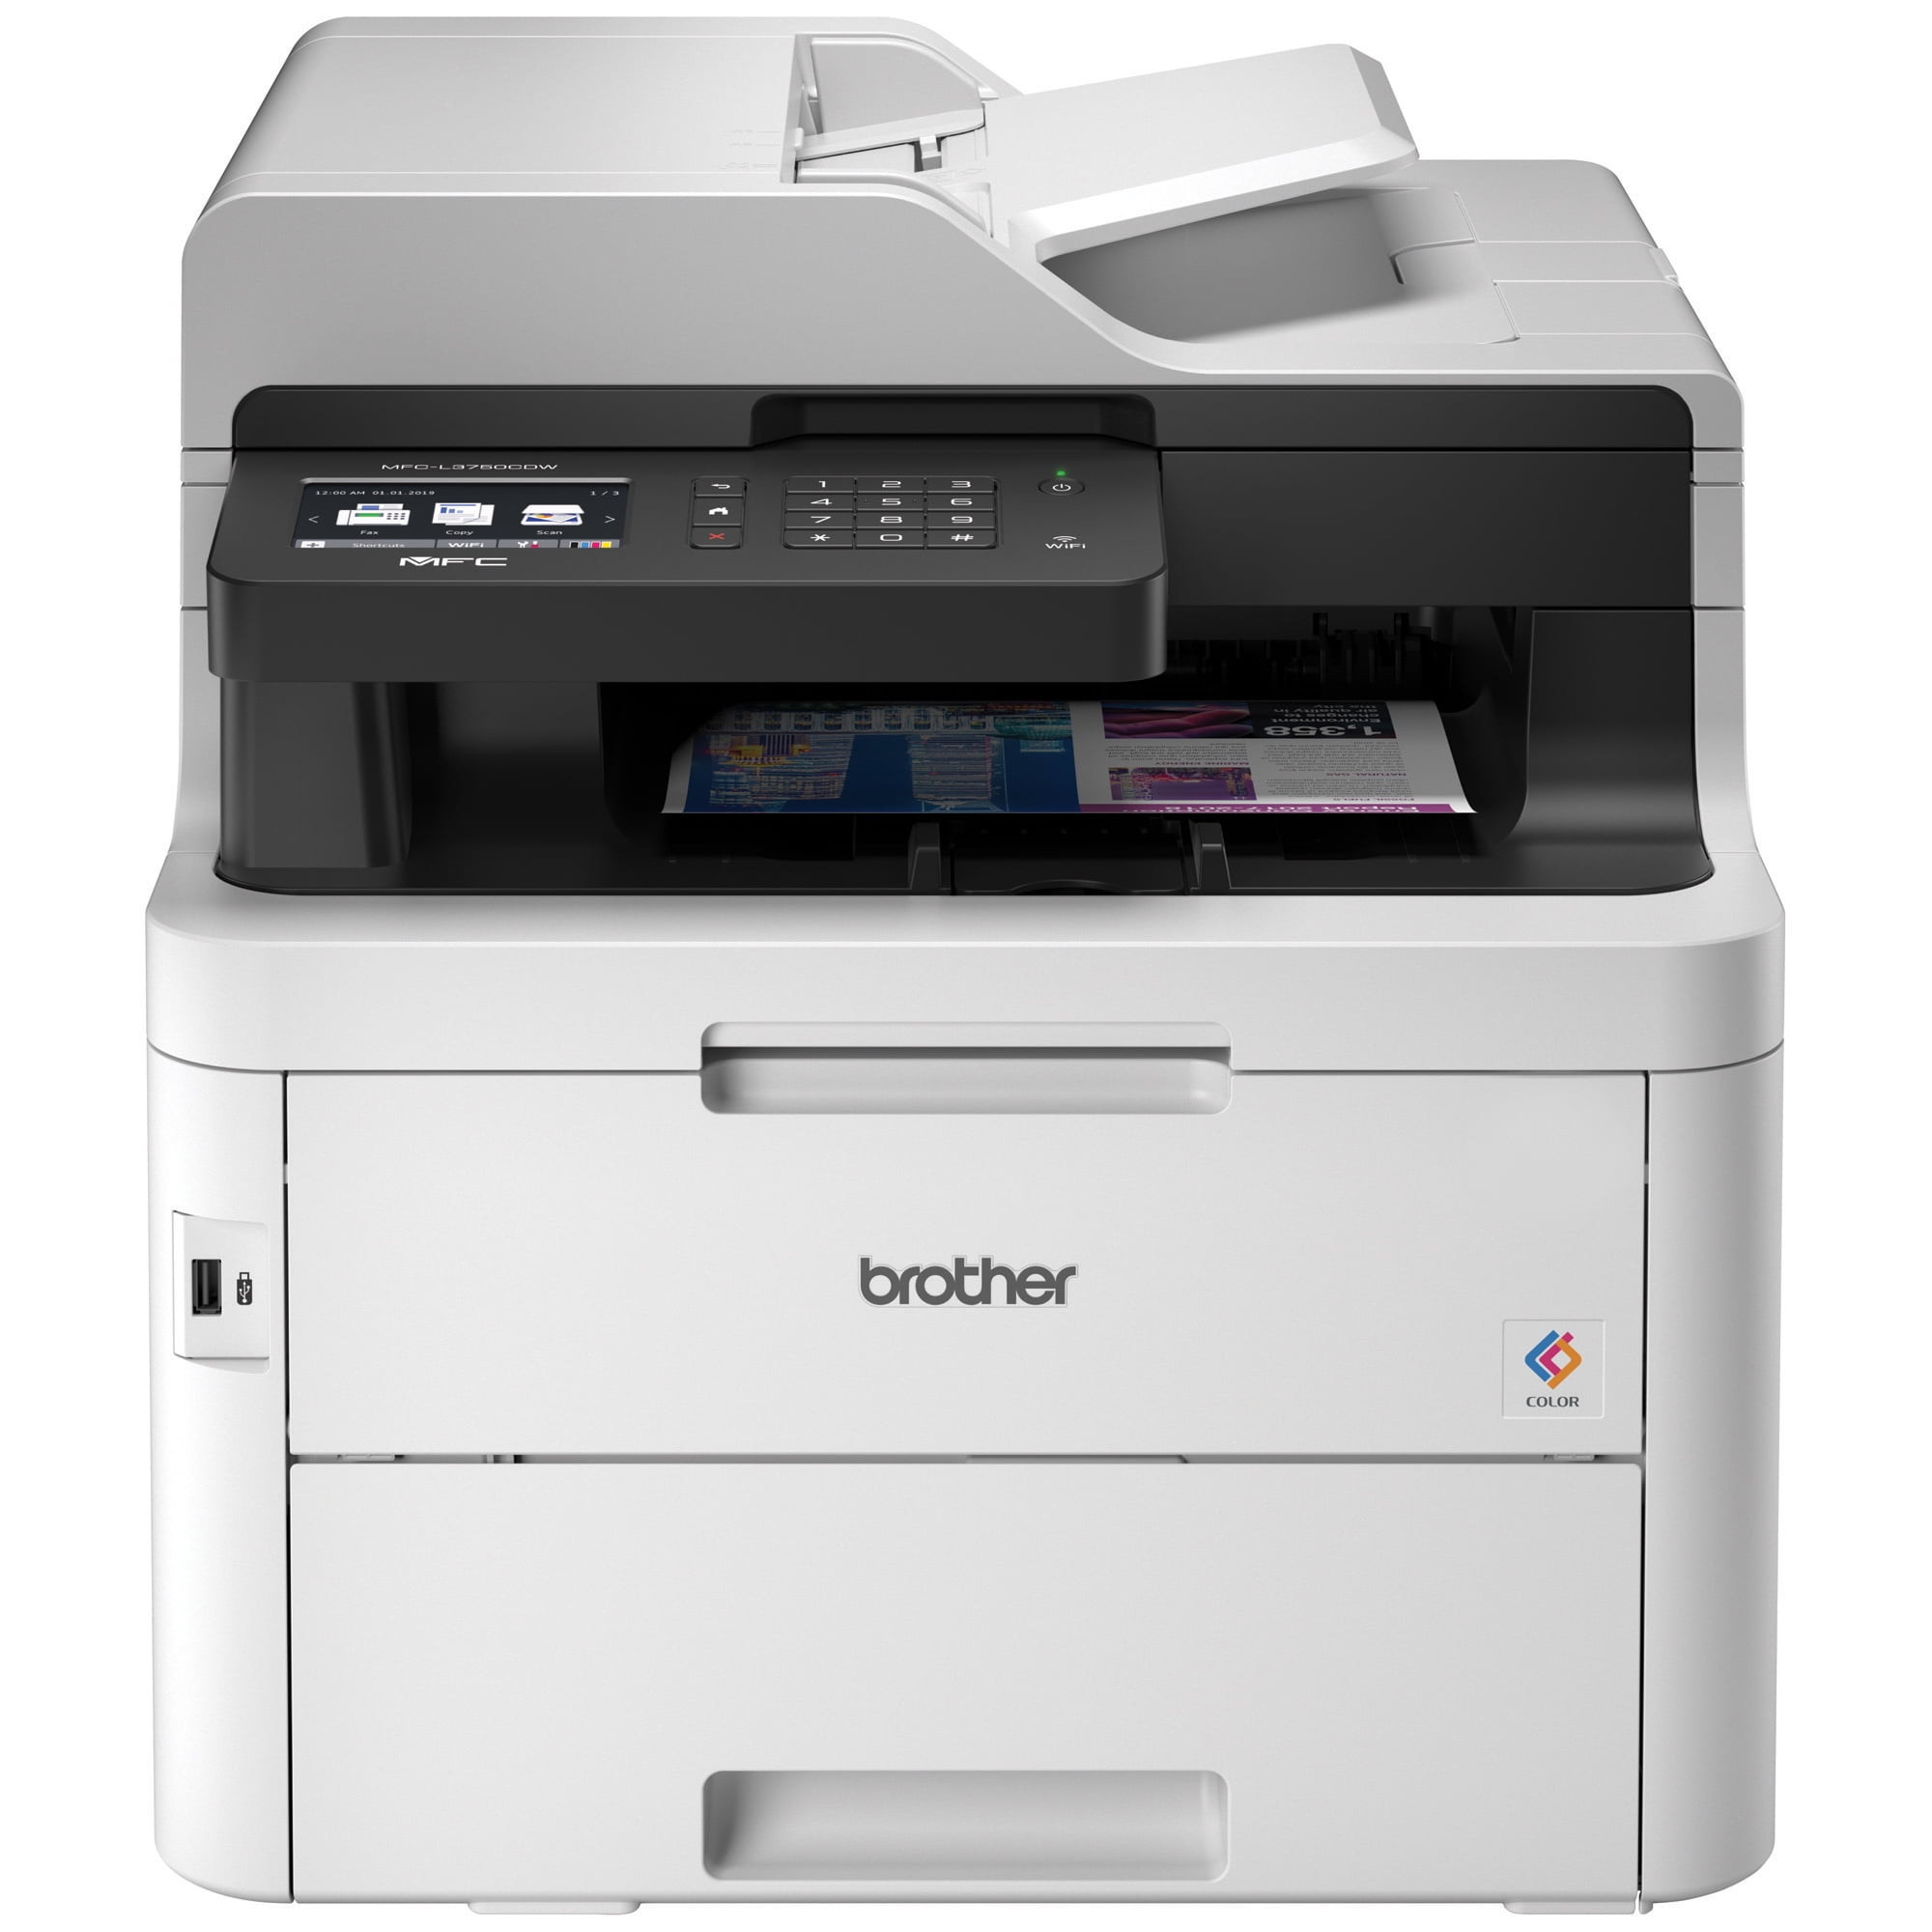 Vrijwillig het einde beeld Brother MFC-L3750CDW Compact Digital Color All-in-One Printer, 3.7” Color  Touchscreen, Wireless and Duplex Printing - Walmart.com